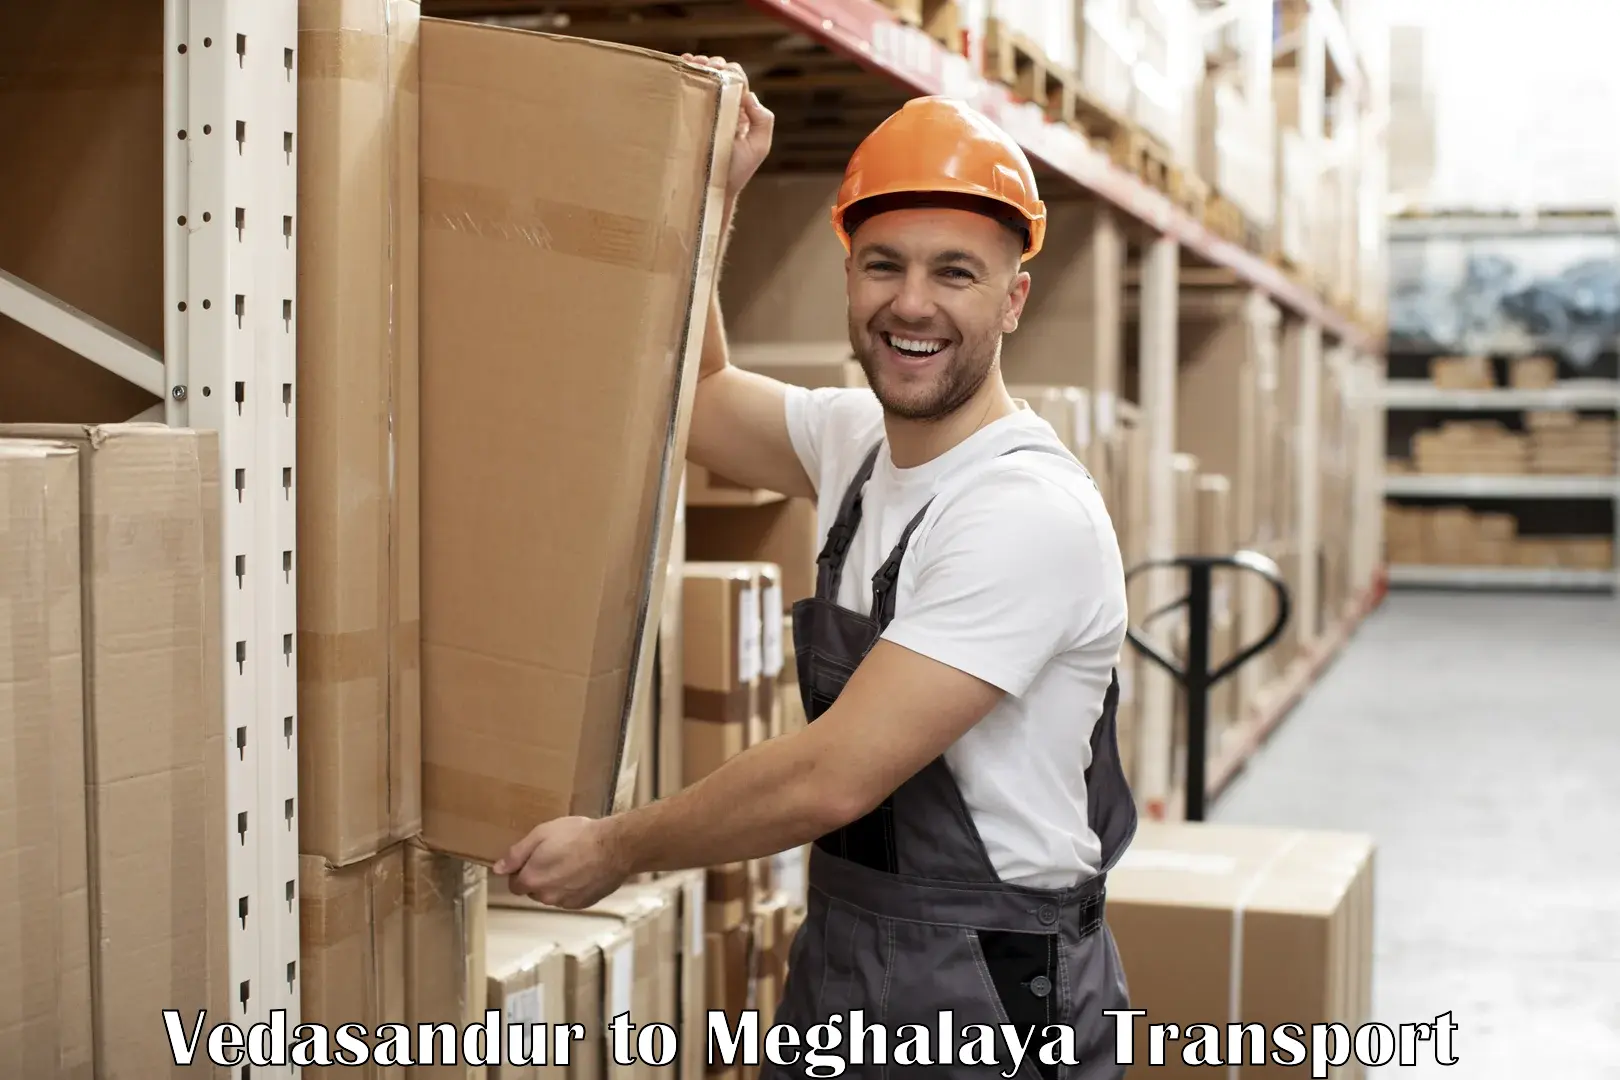 Package delivery services Vedasandur to Shillong